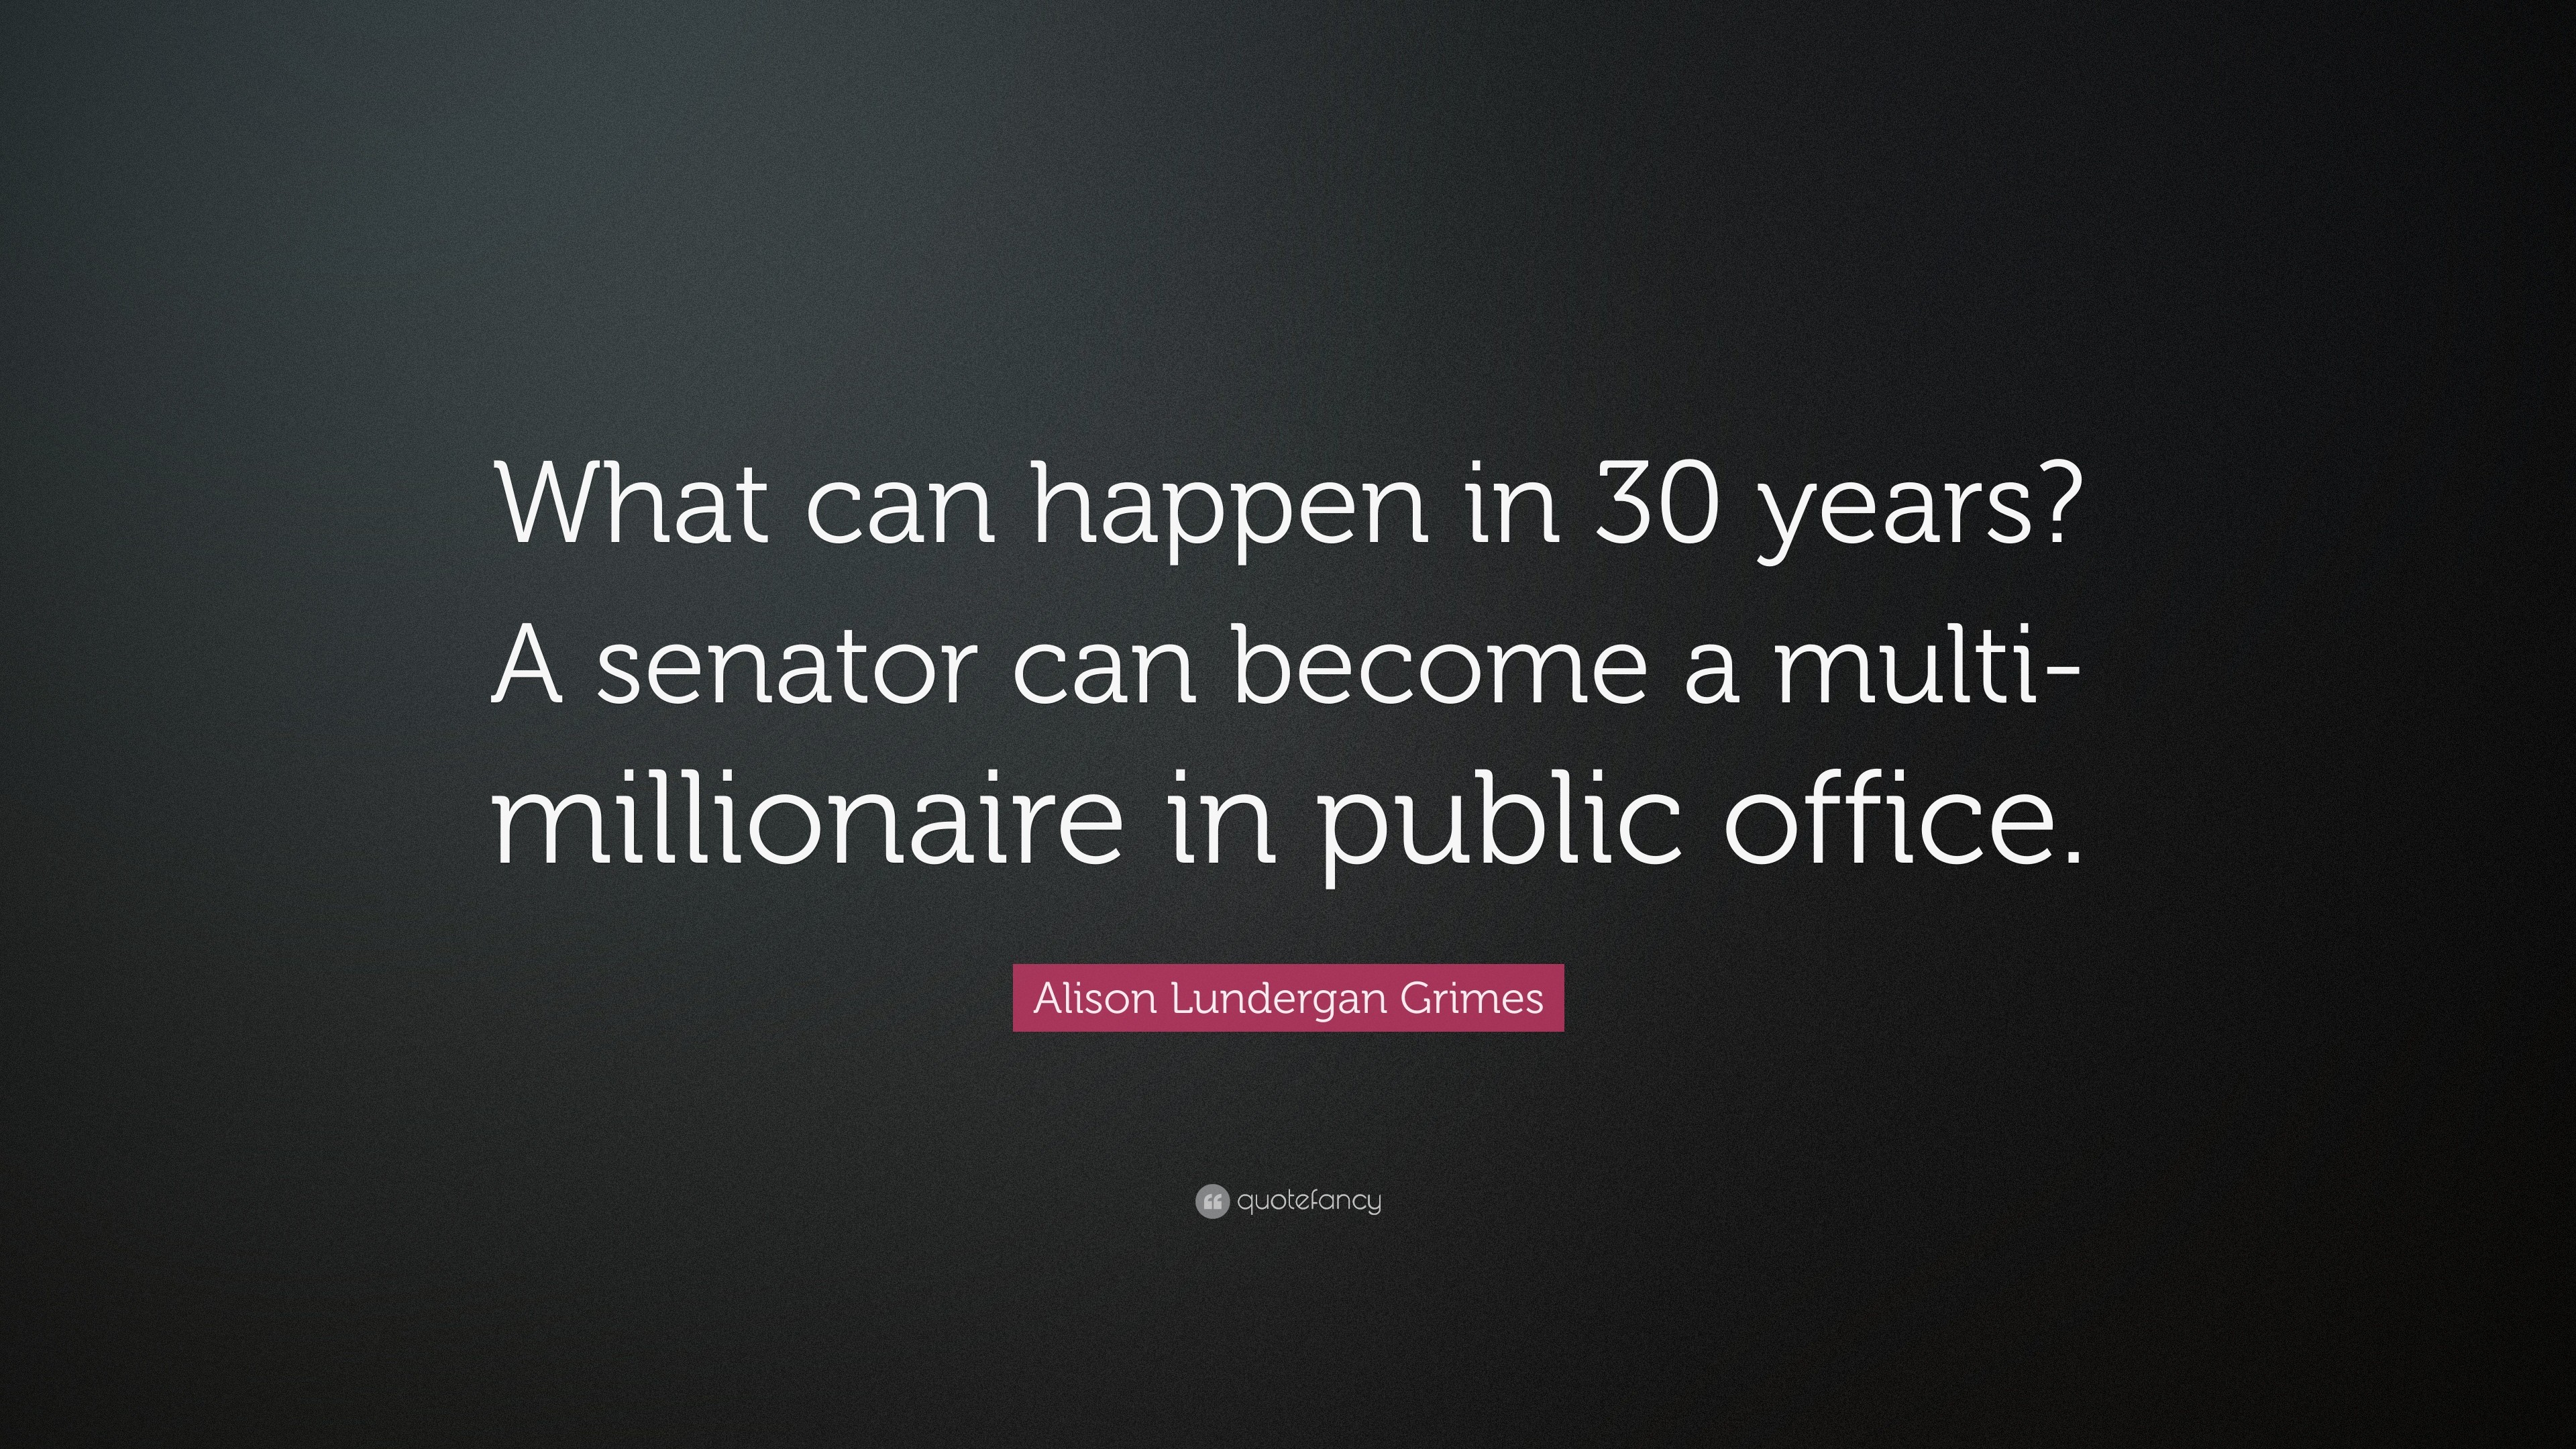 3840x2160 Alison Lundergan Grimes Quote: “What can happen in 30 years? A senator can